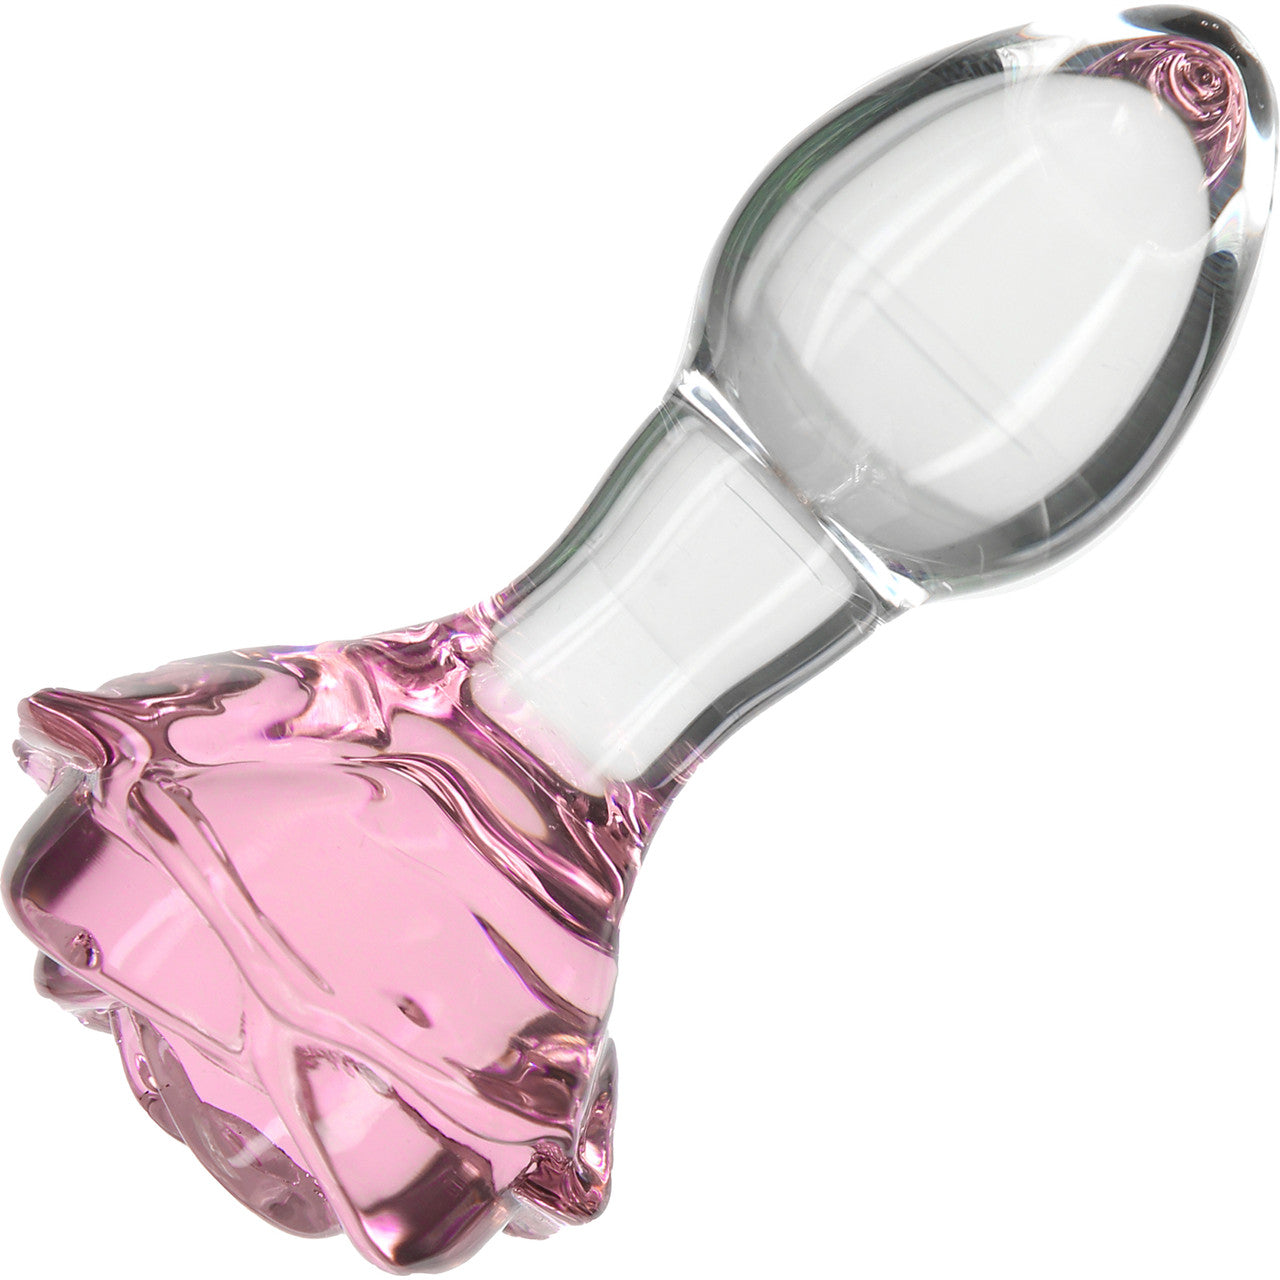 Rosy Glass Anal Plug by Pillow Talk